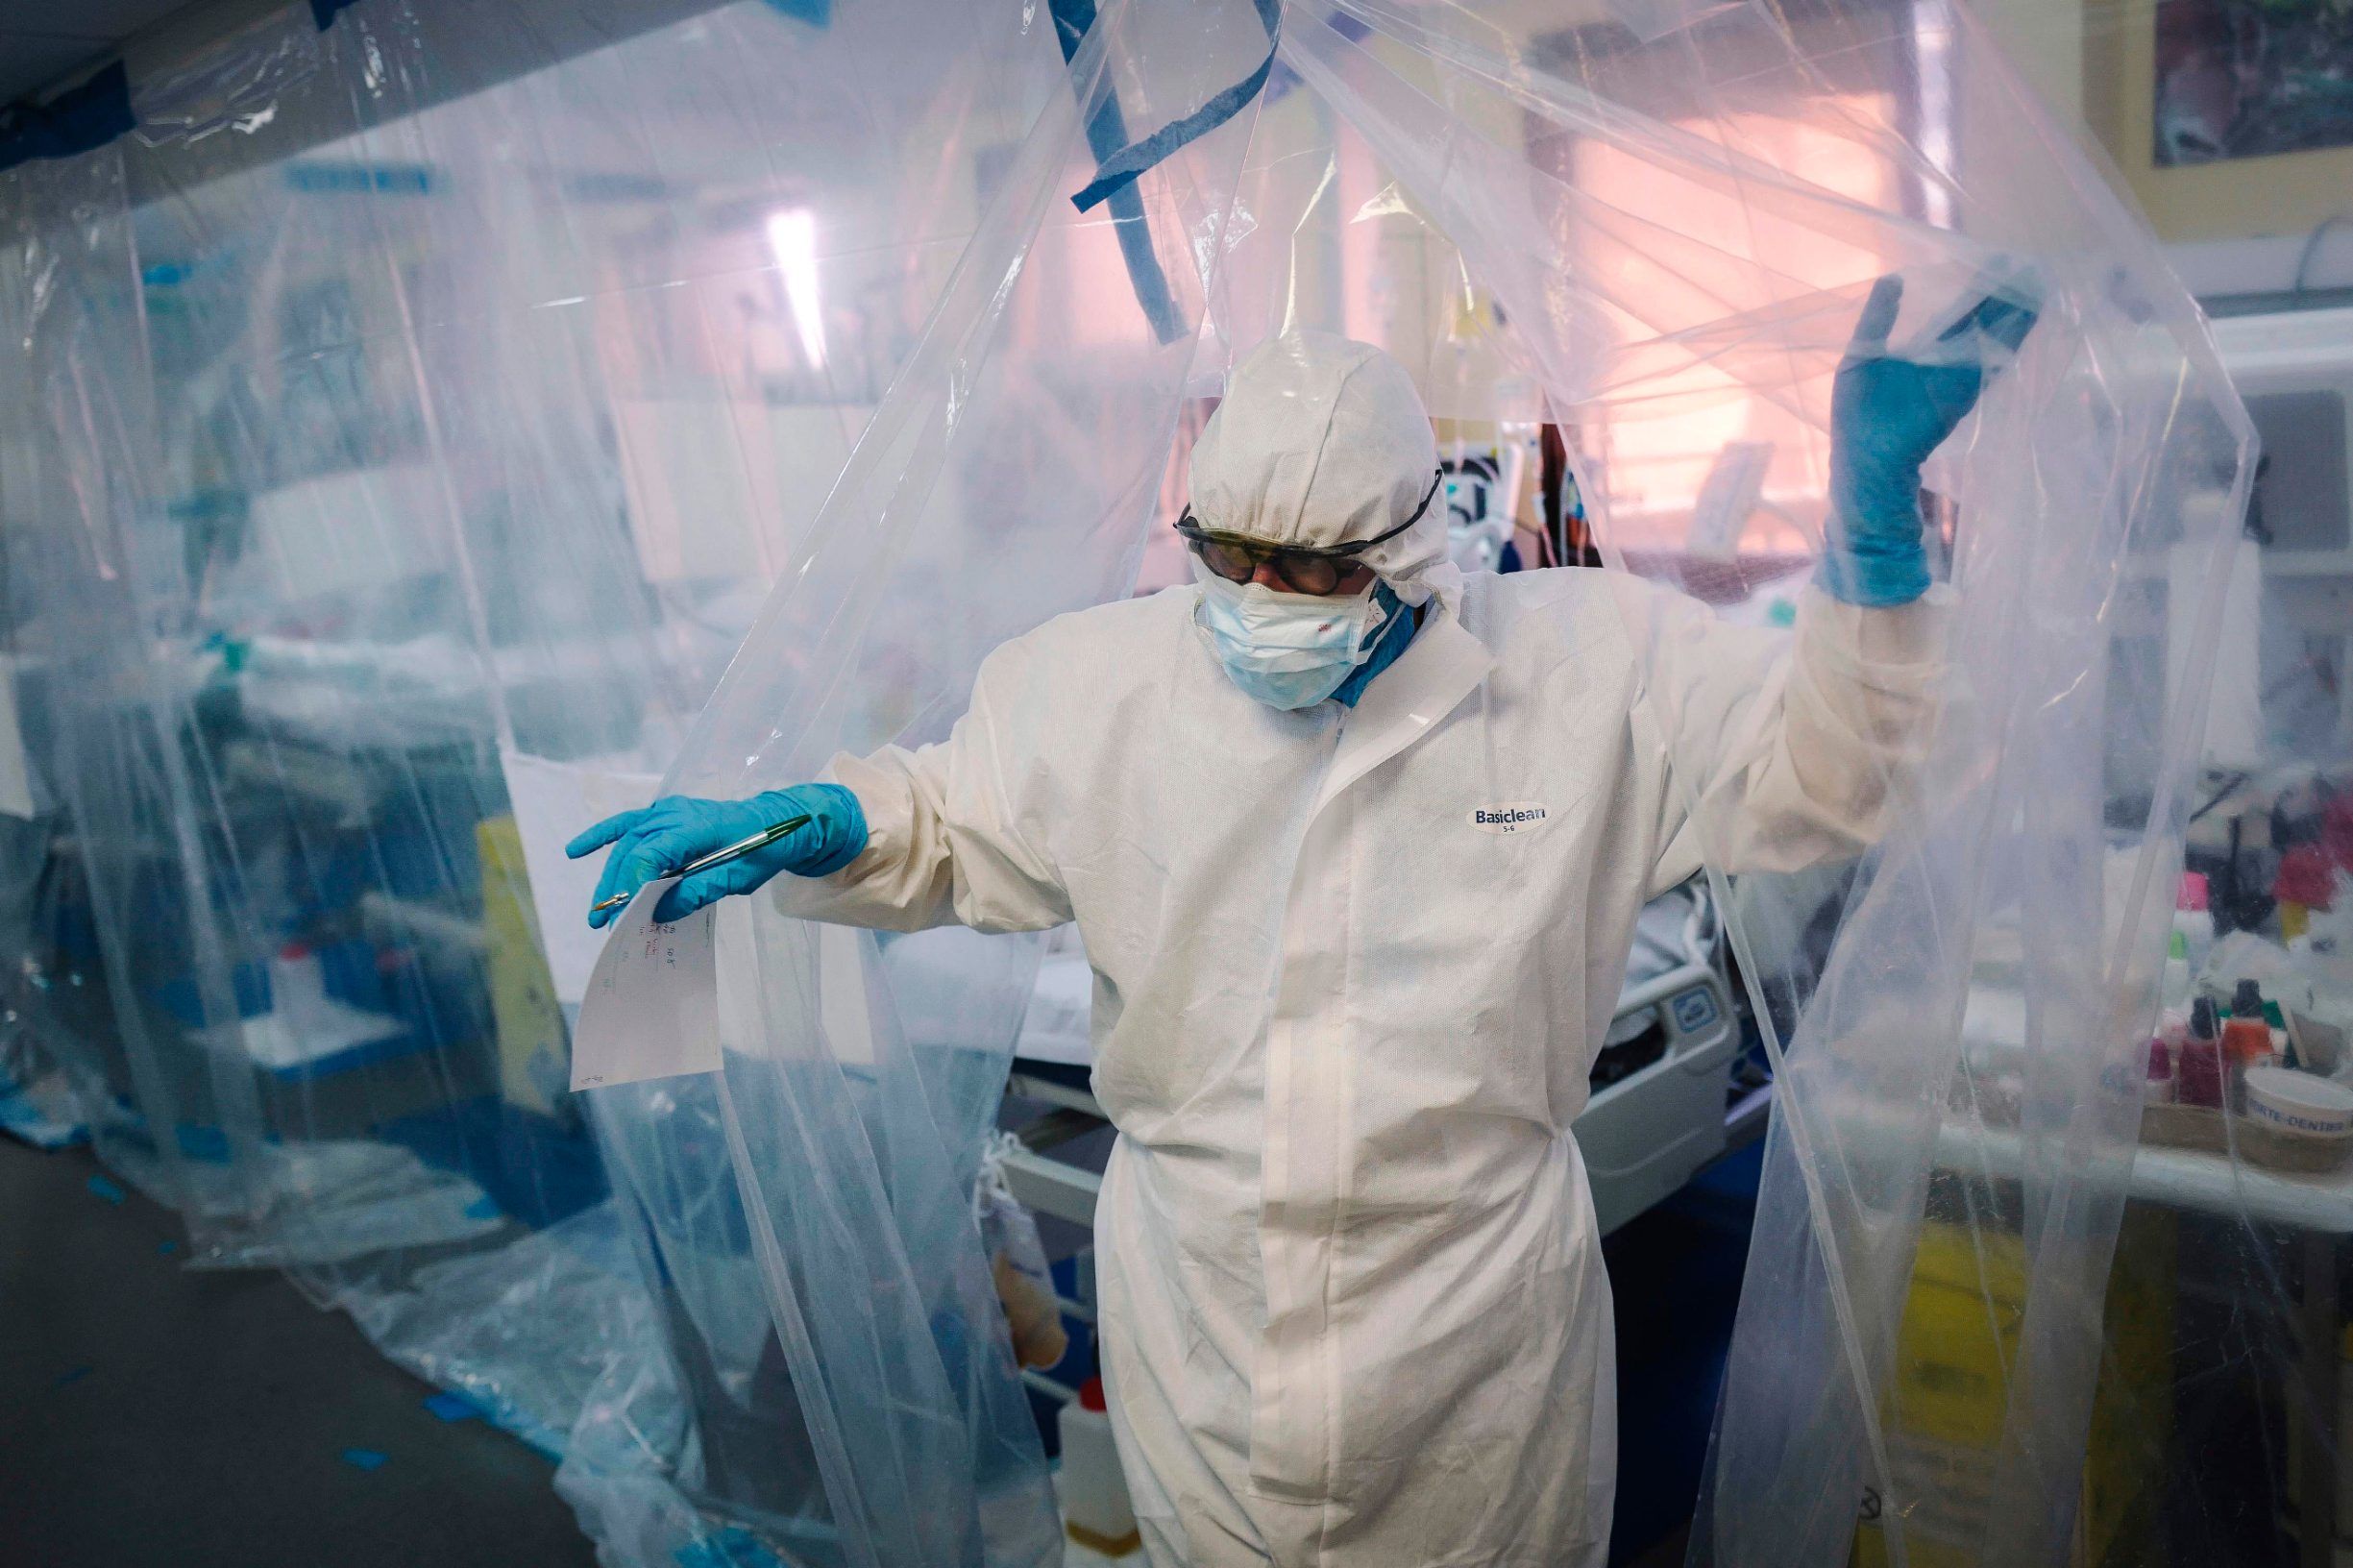 A medical staff member exits a room protected by a transparent tarpaulin after taking care of a patient infected with COVID-19 at the intensive care unit of the Franco-Britannique hospital in Levallois-Perret, northern Paris, on April 9, 2020. (Photo by LUCAS BARIOULET / AFP)